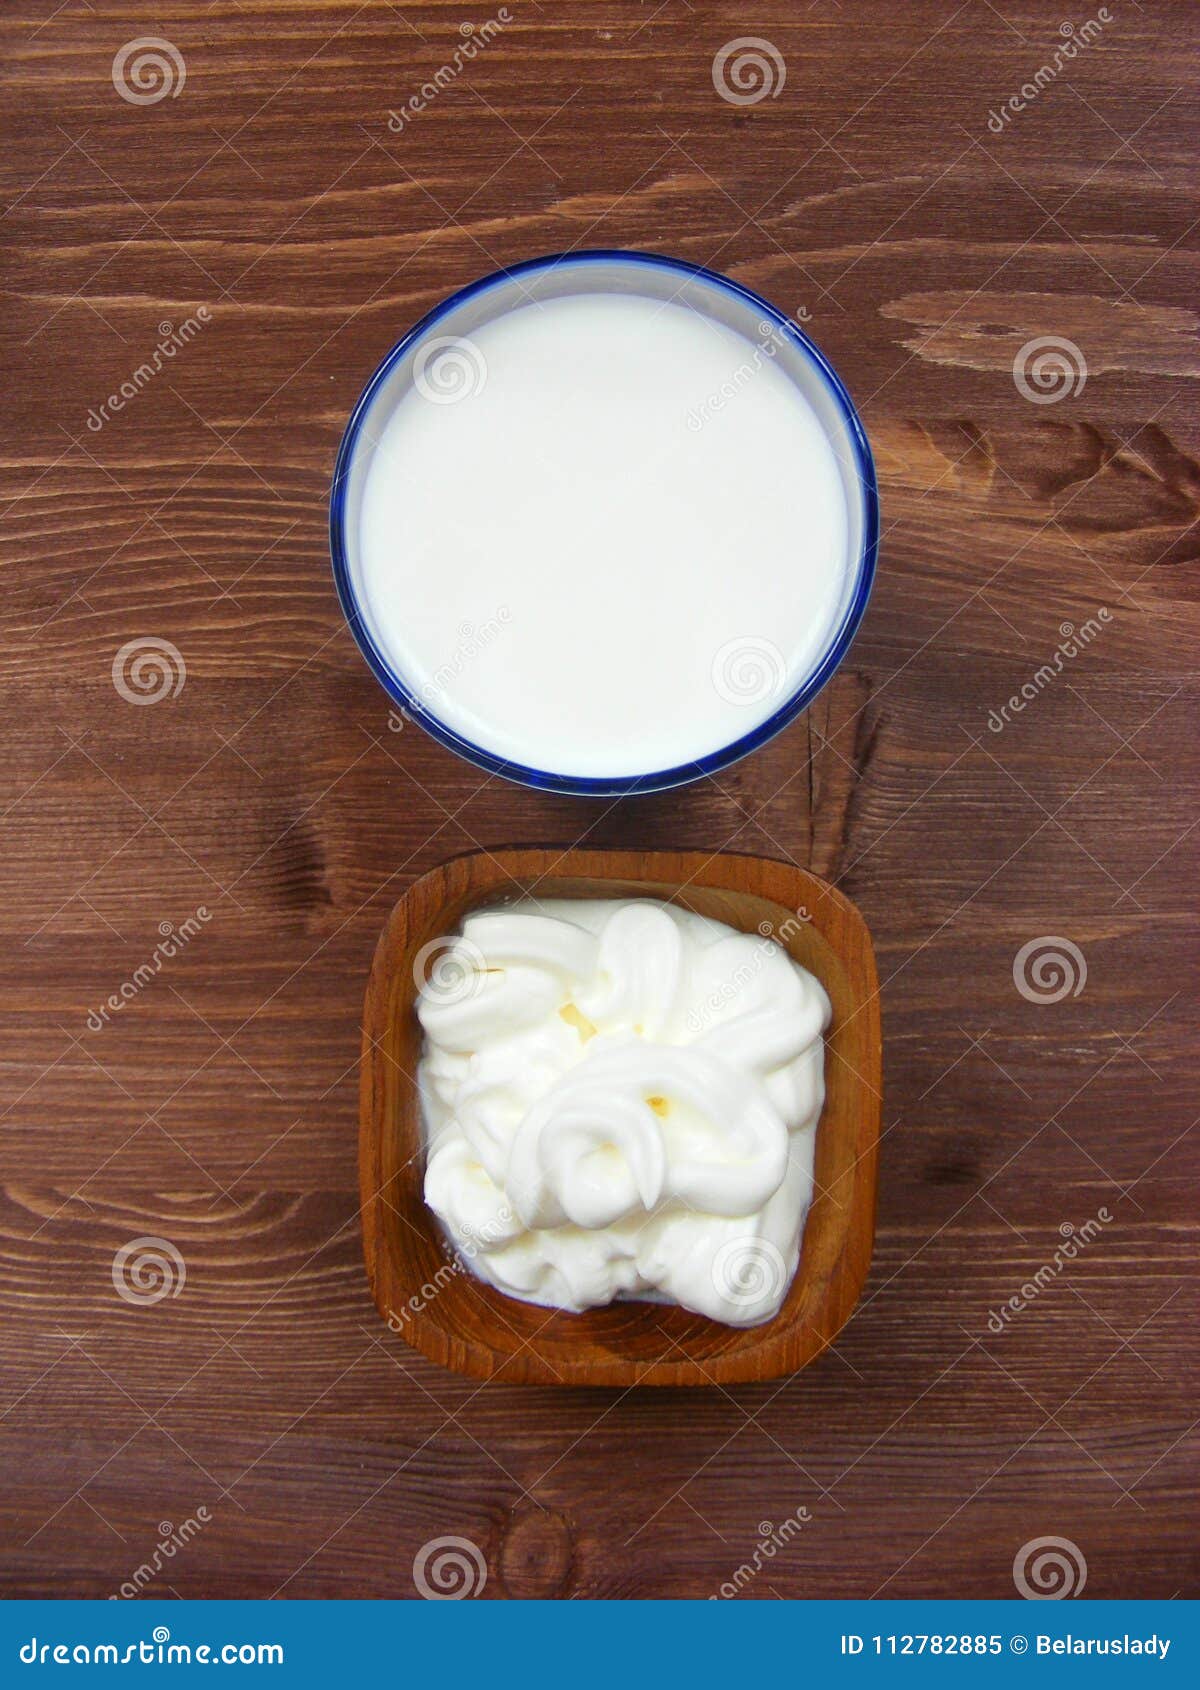 Milk And Sour Cream In Wooden Bowl On Wooden Table Vertical Flat